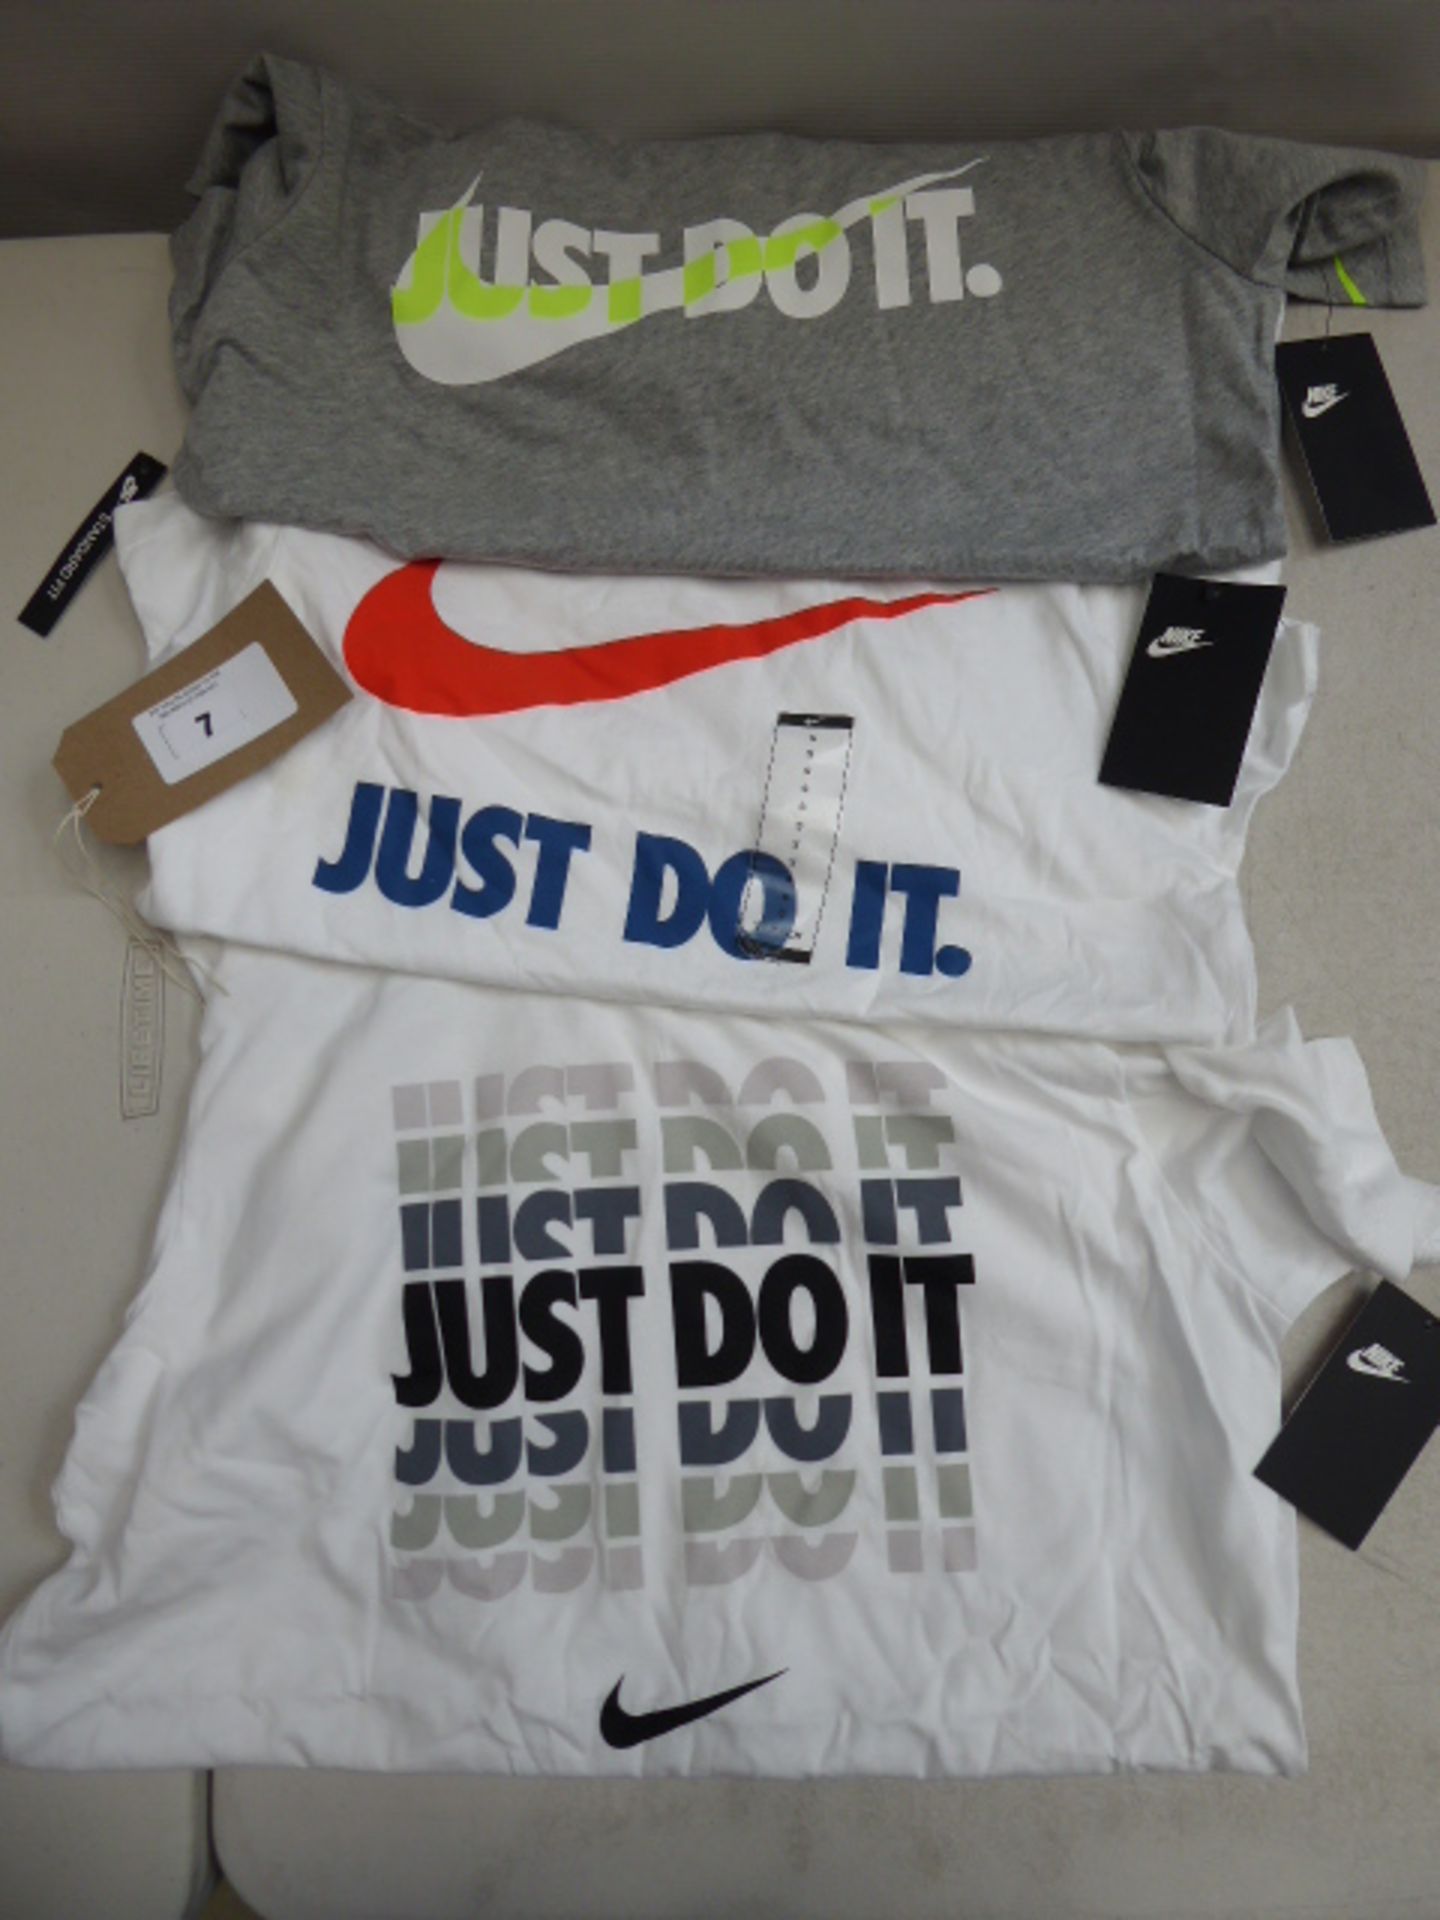 Three Nike Just Do It t-shirts sizes small, medium and large